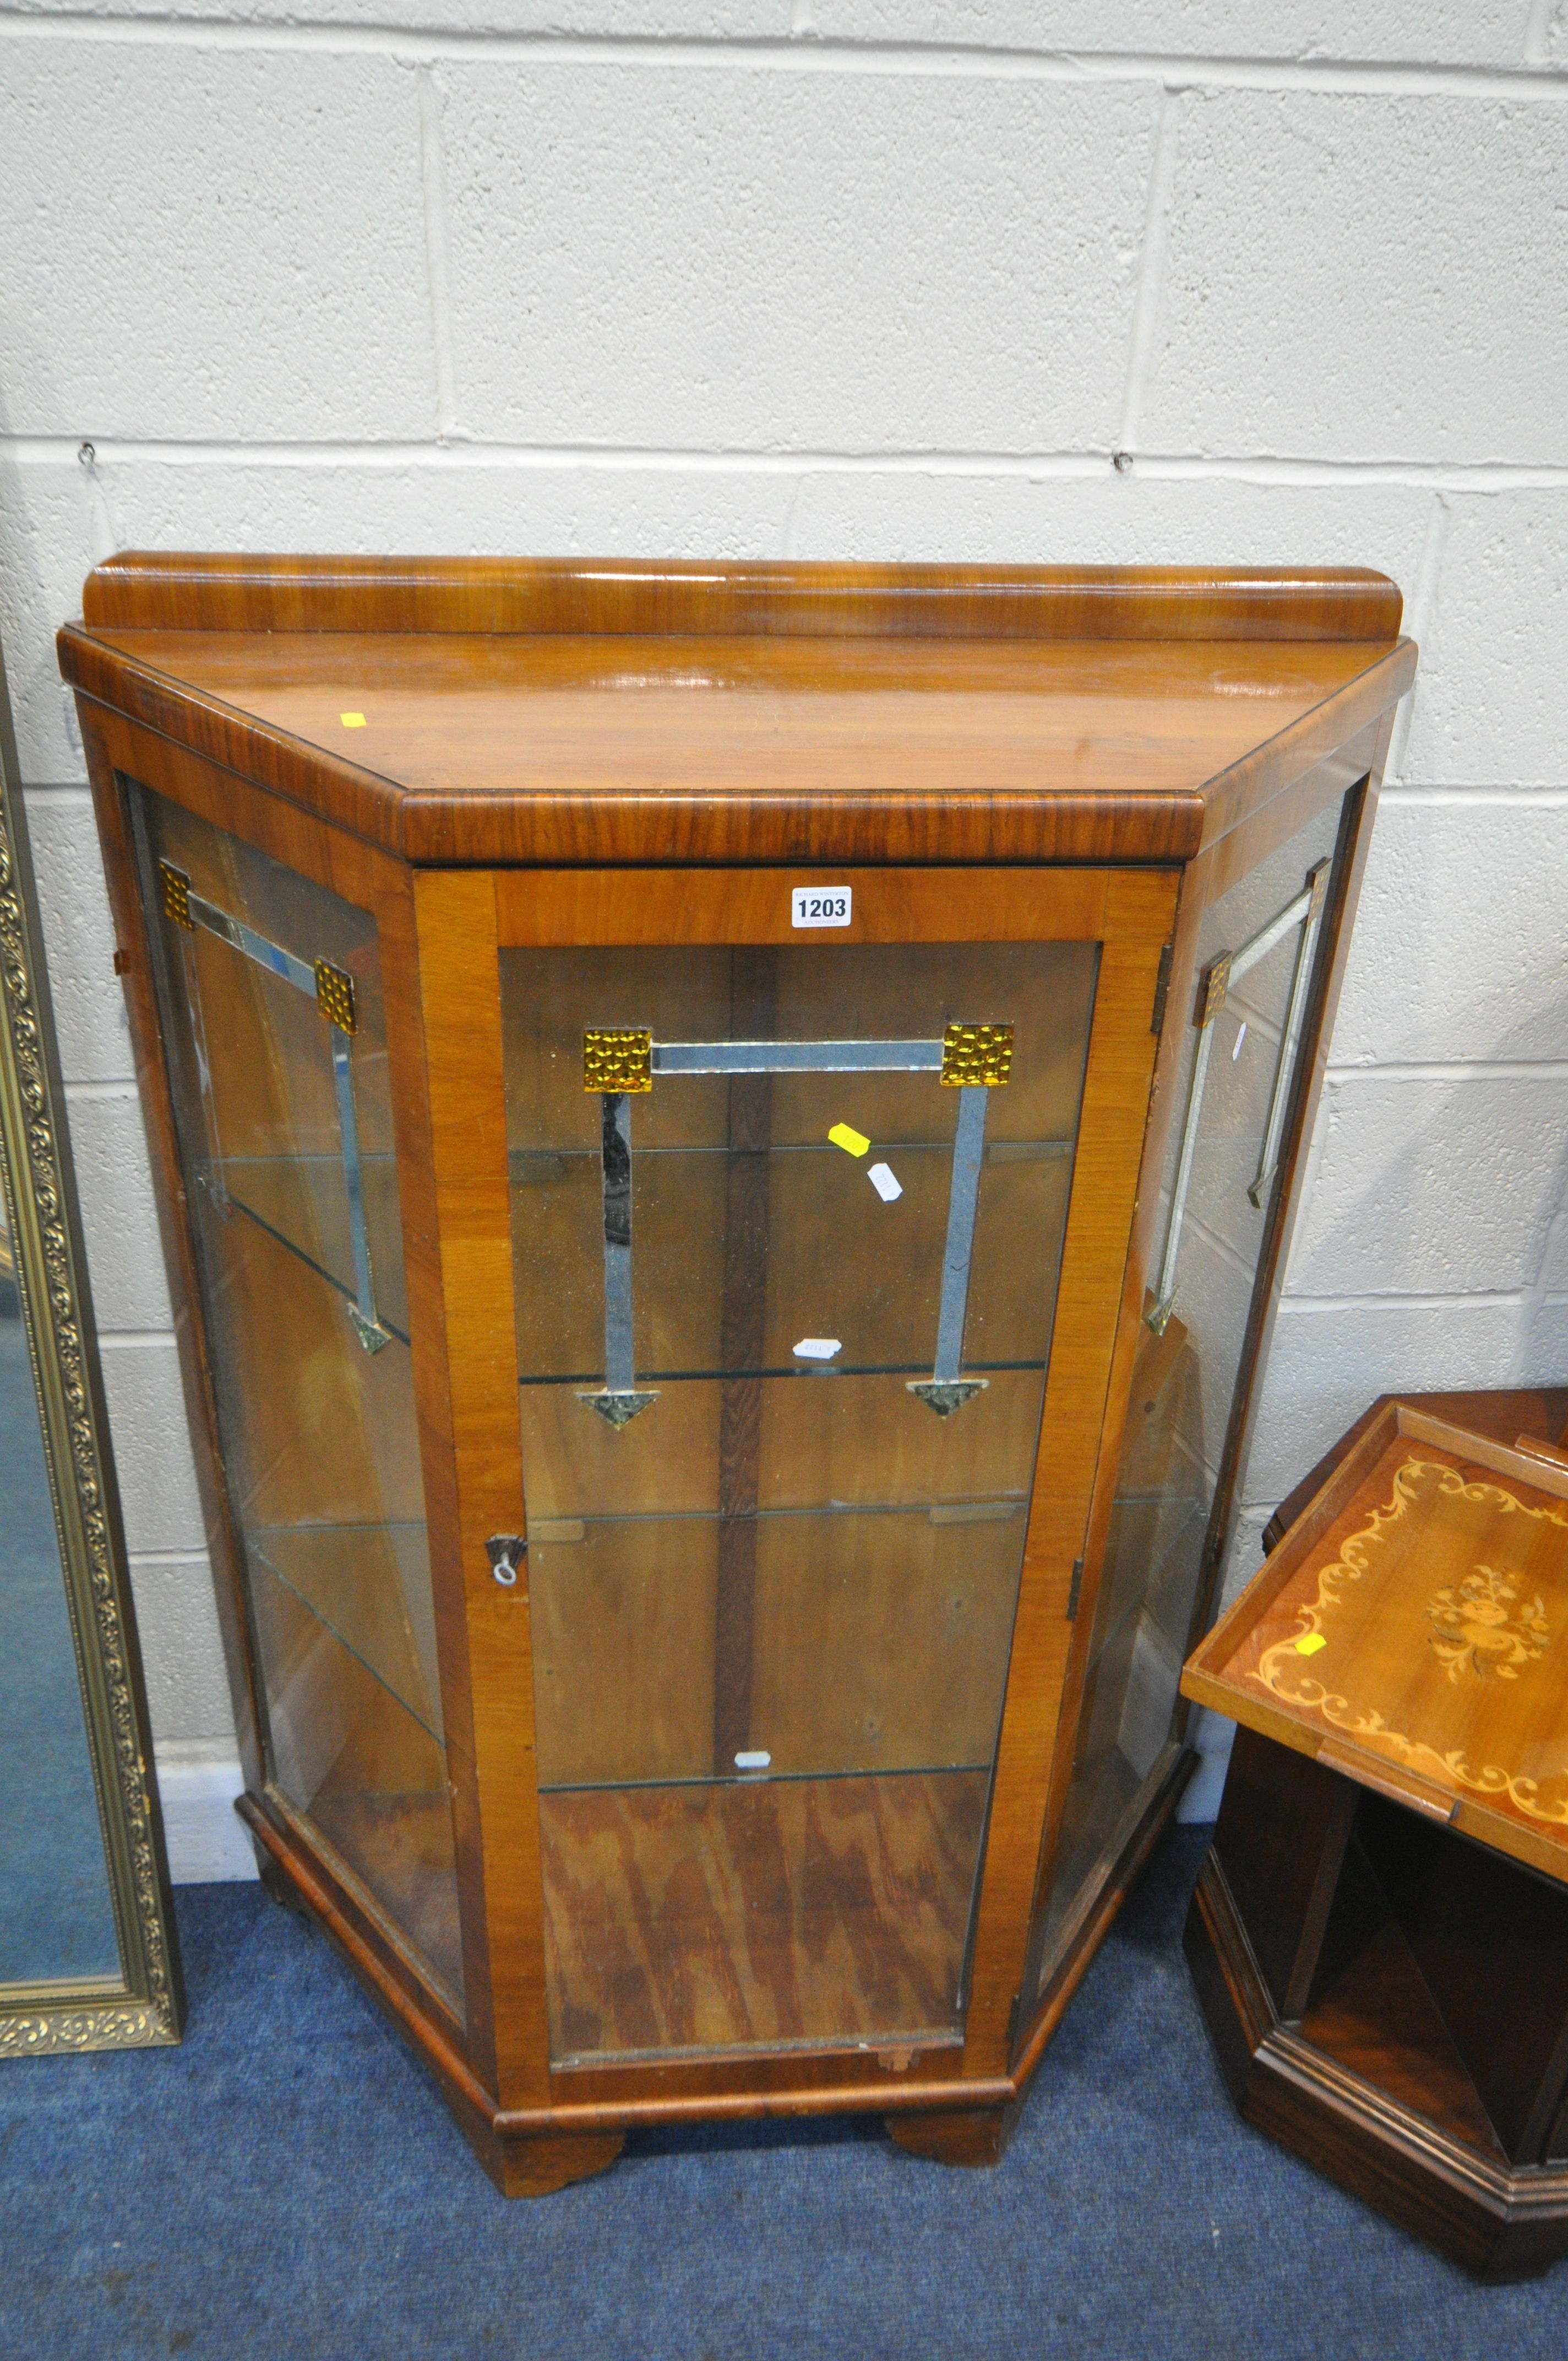 AN ART DECO SINGLE DOOR DISPLAY CABINET, with a raised back, two glass shelves, mirrored - Image 2 of 3